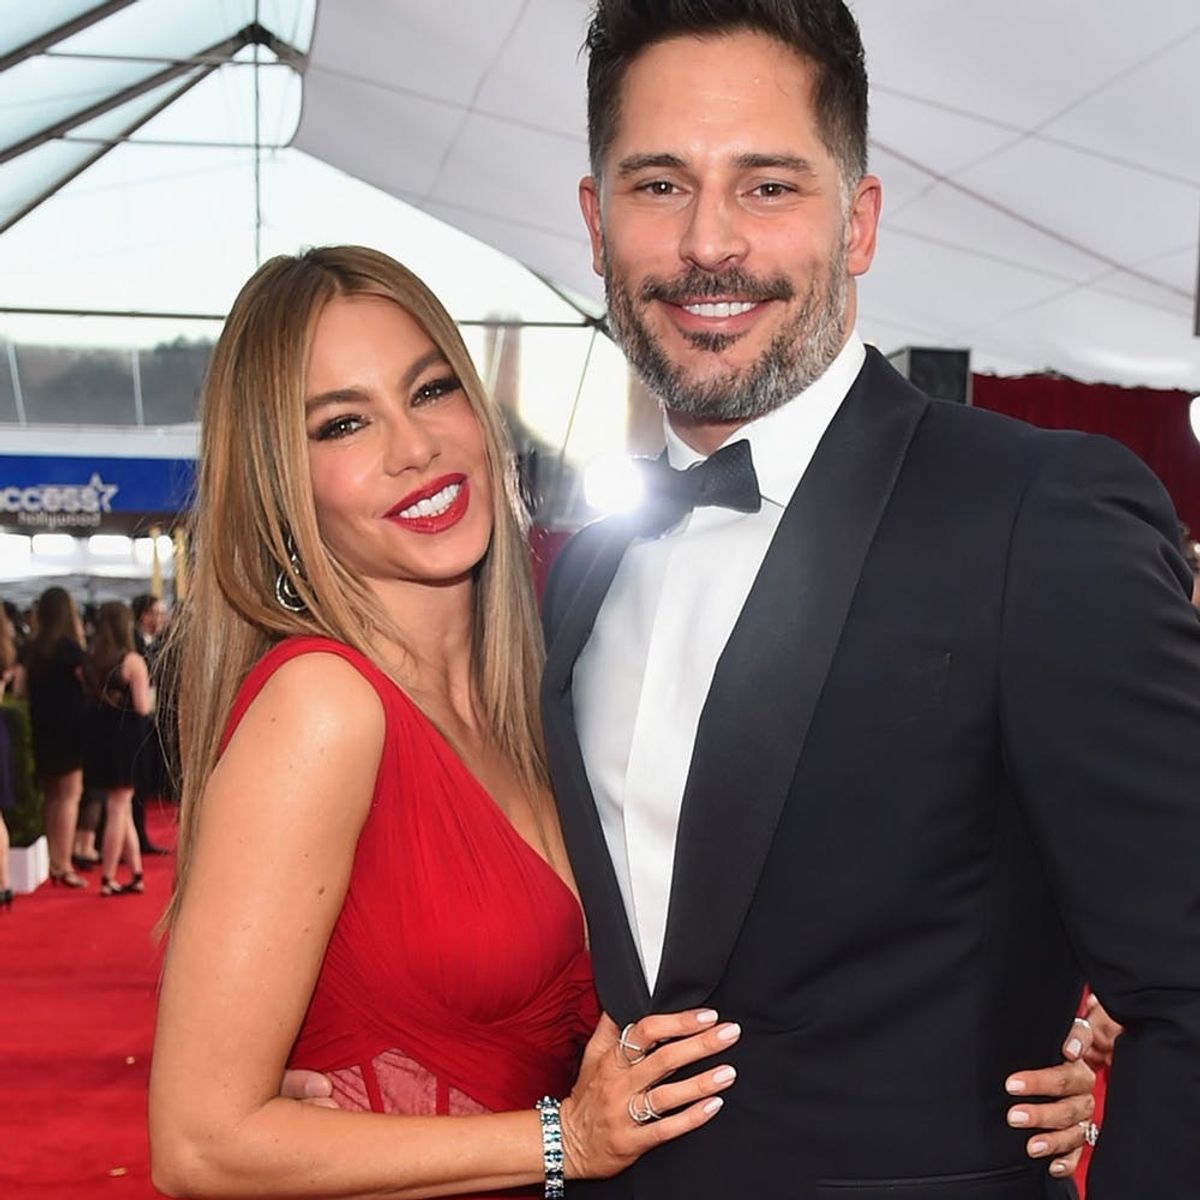 Sofia Vergara Helped Her Wedding Guests Avoid a Hangover with an IV Station